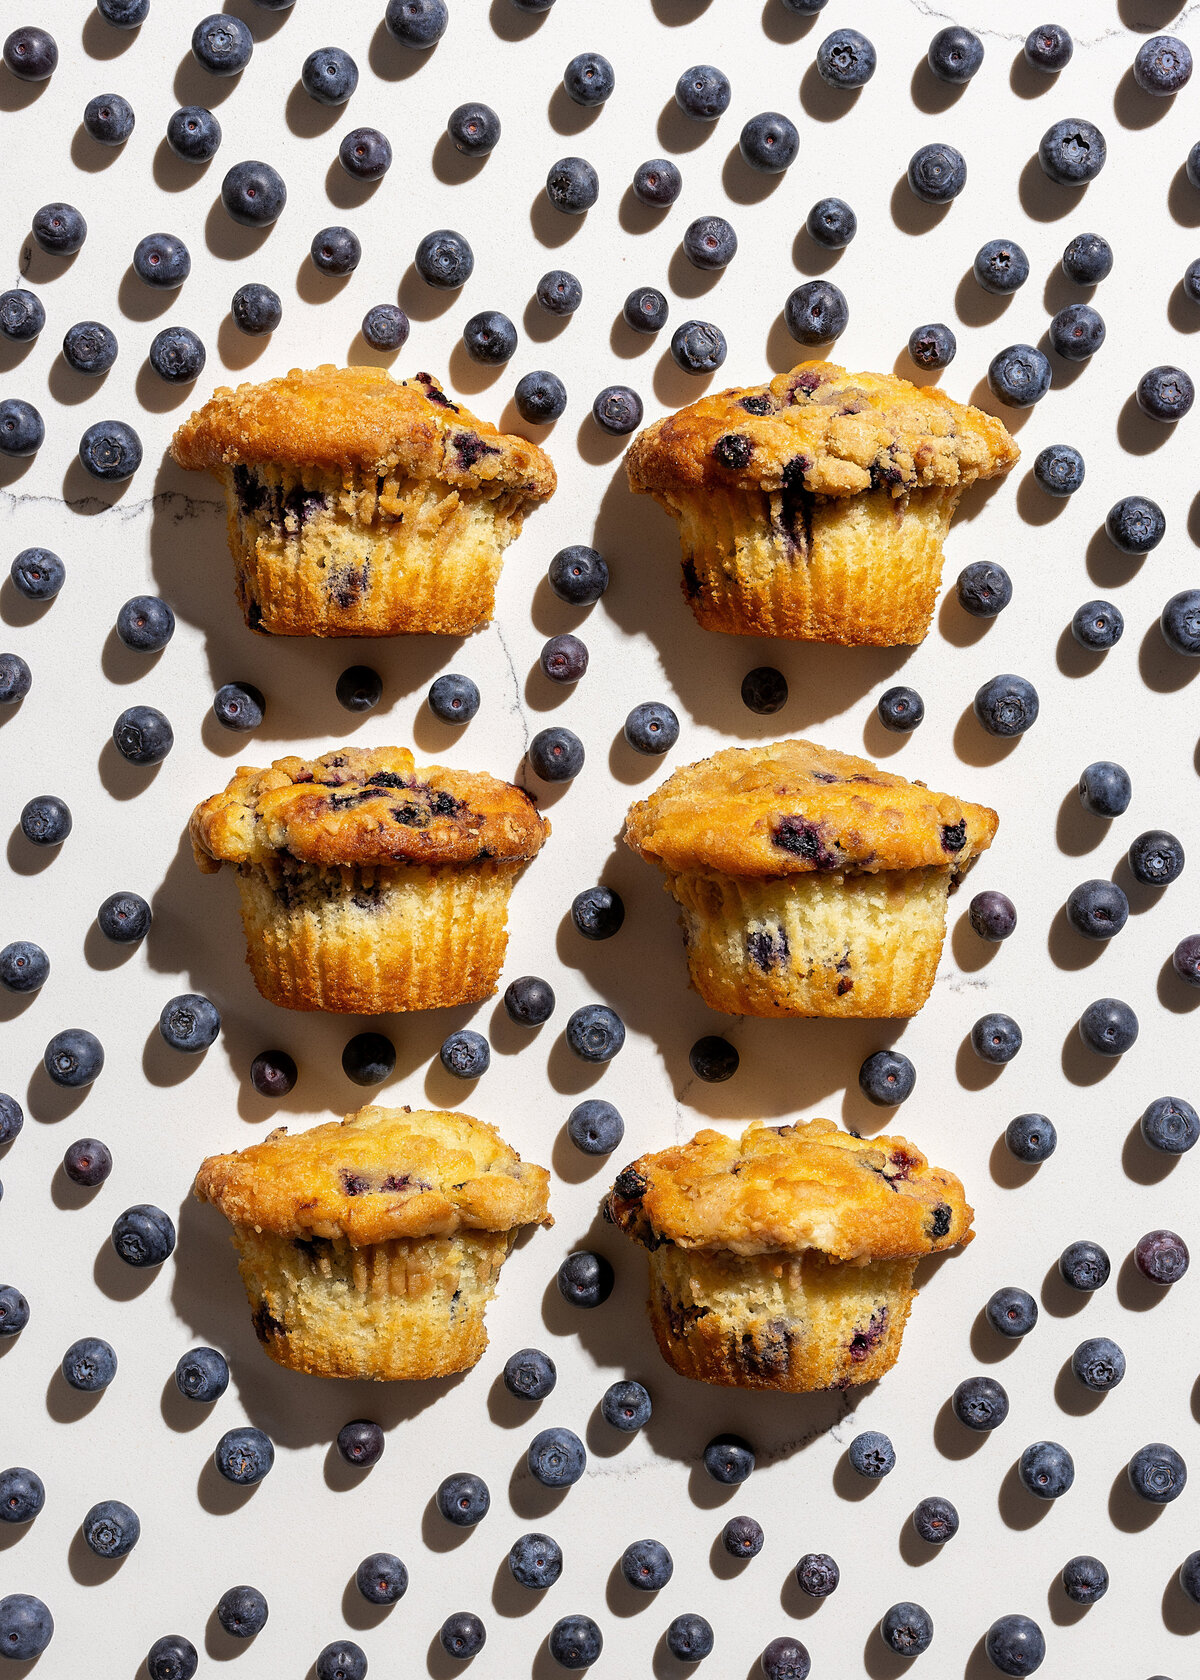 Muffins surrounded by blueberries